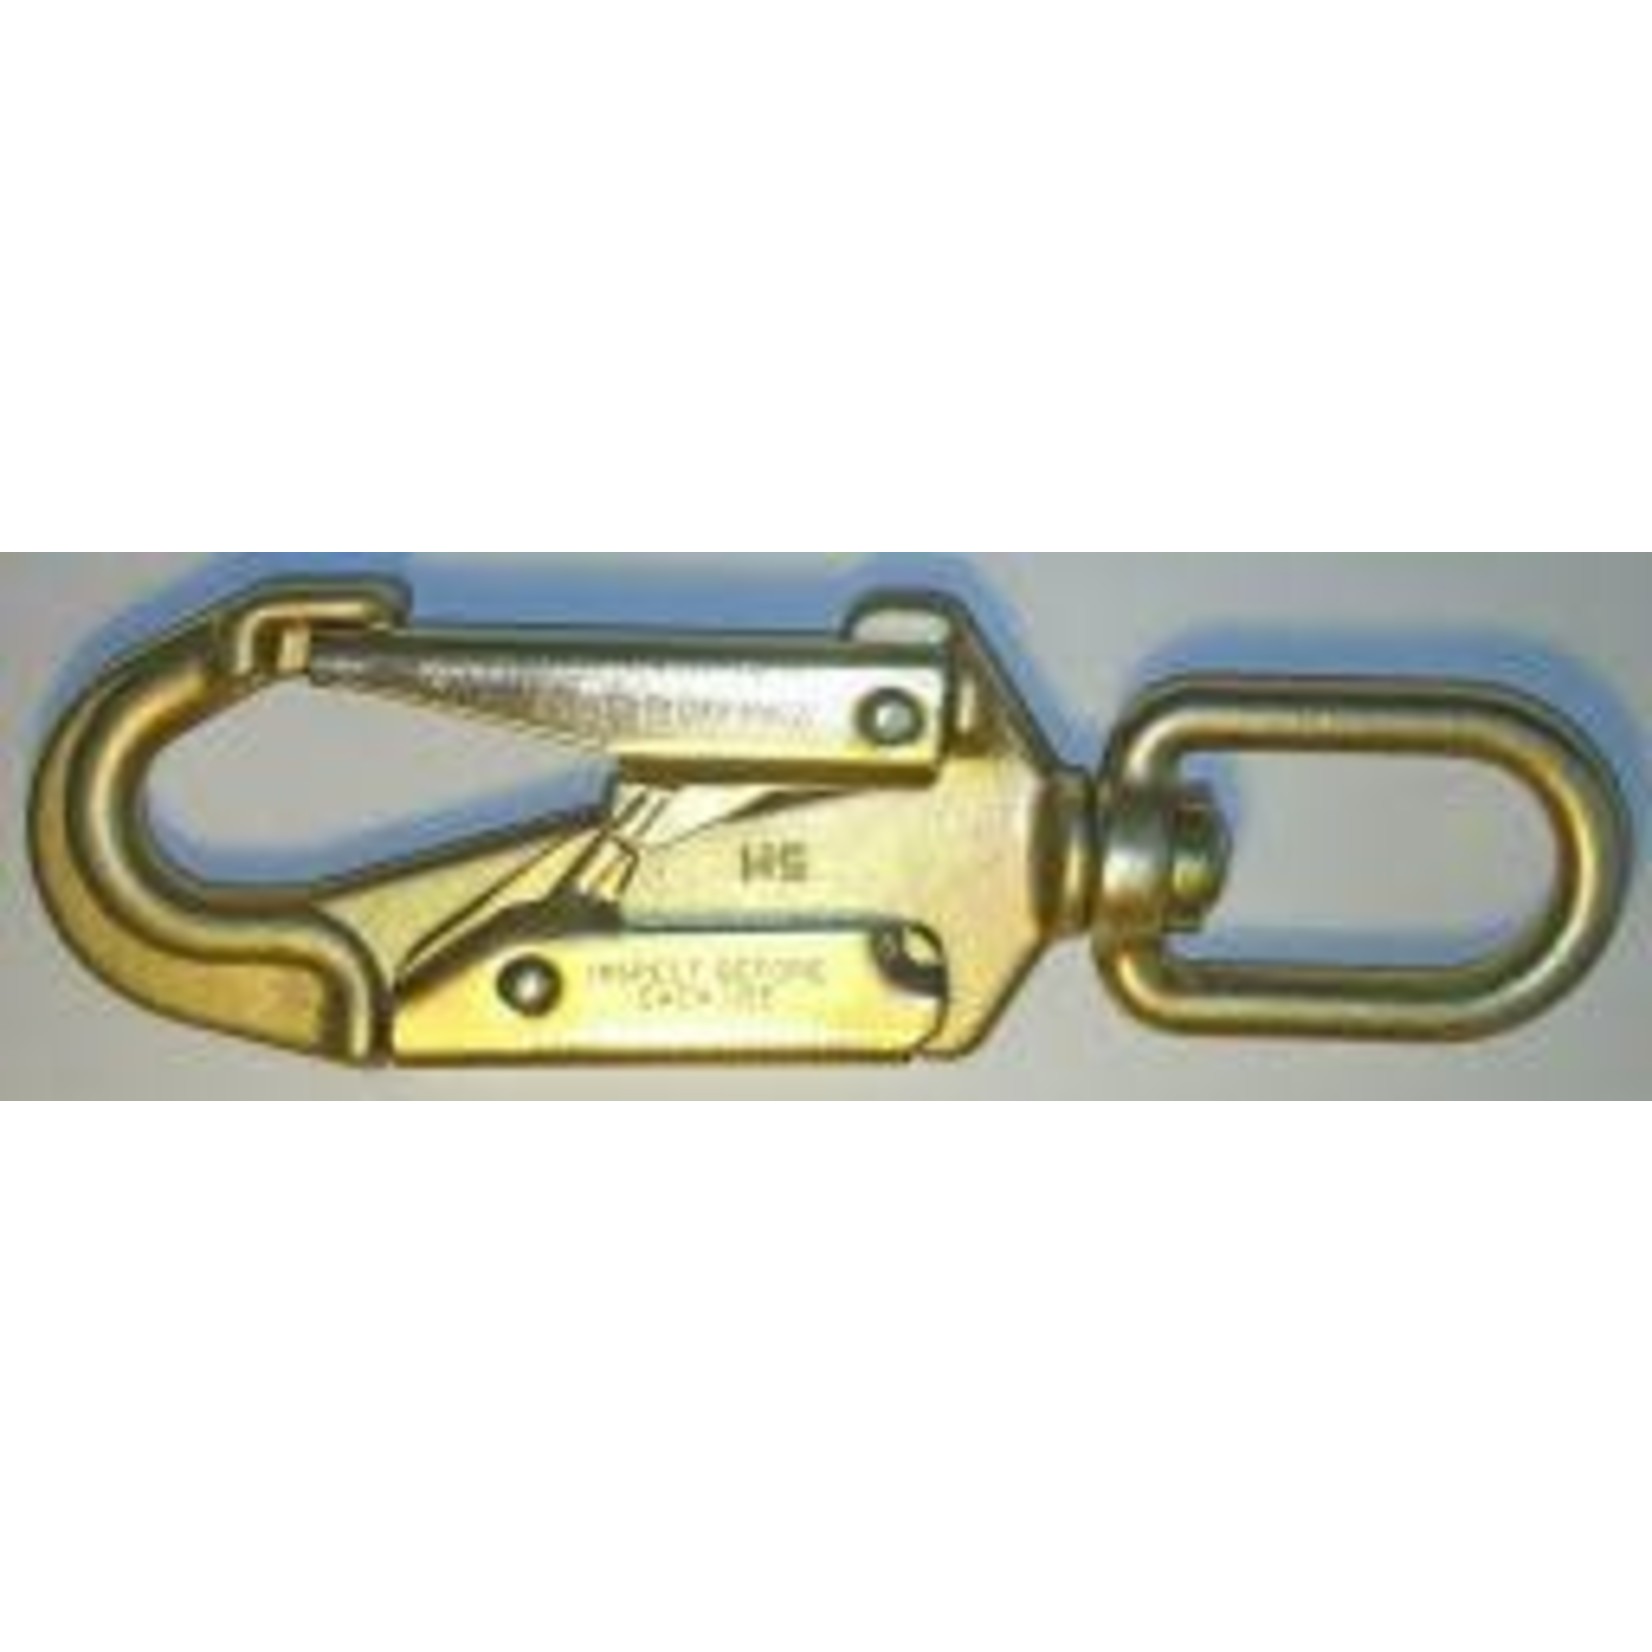 U.S. Rigging Snap, Forged Alloy Steel Locking Safety Snap 7+1/4in 34Kn Mbs With Swivel Eye